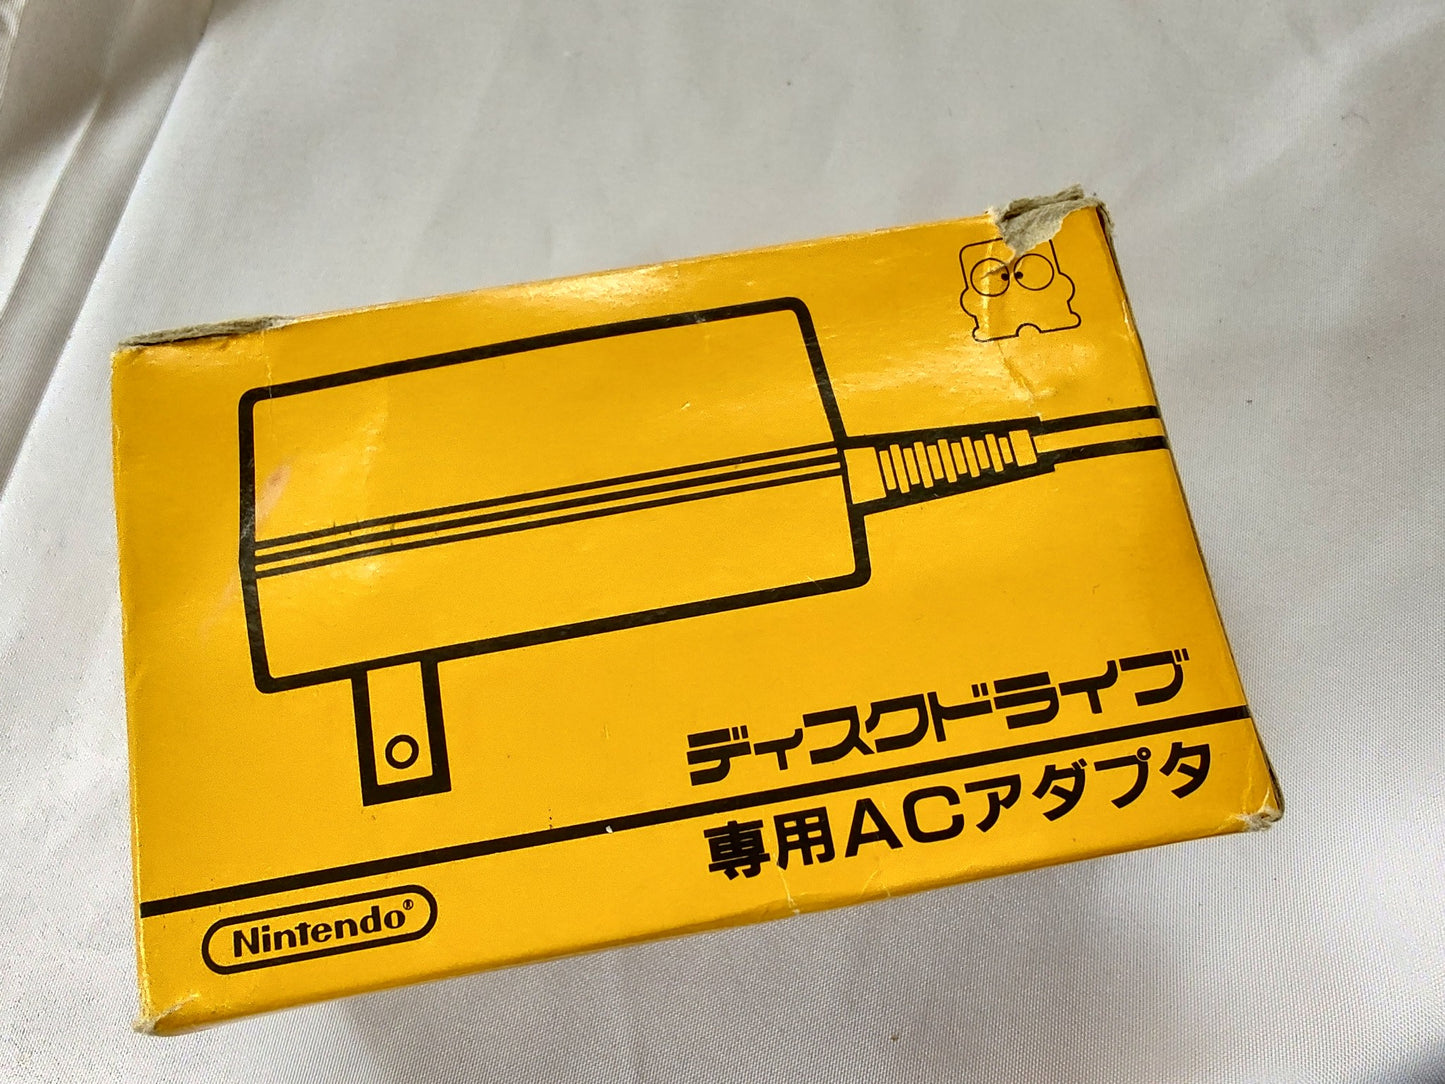 AC Adapter HVC-025 for Nintendo Famicom Disk System with Box, Not tested-e1228-2